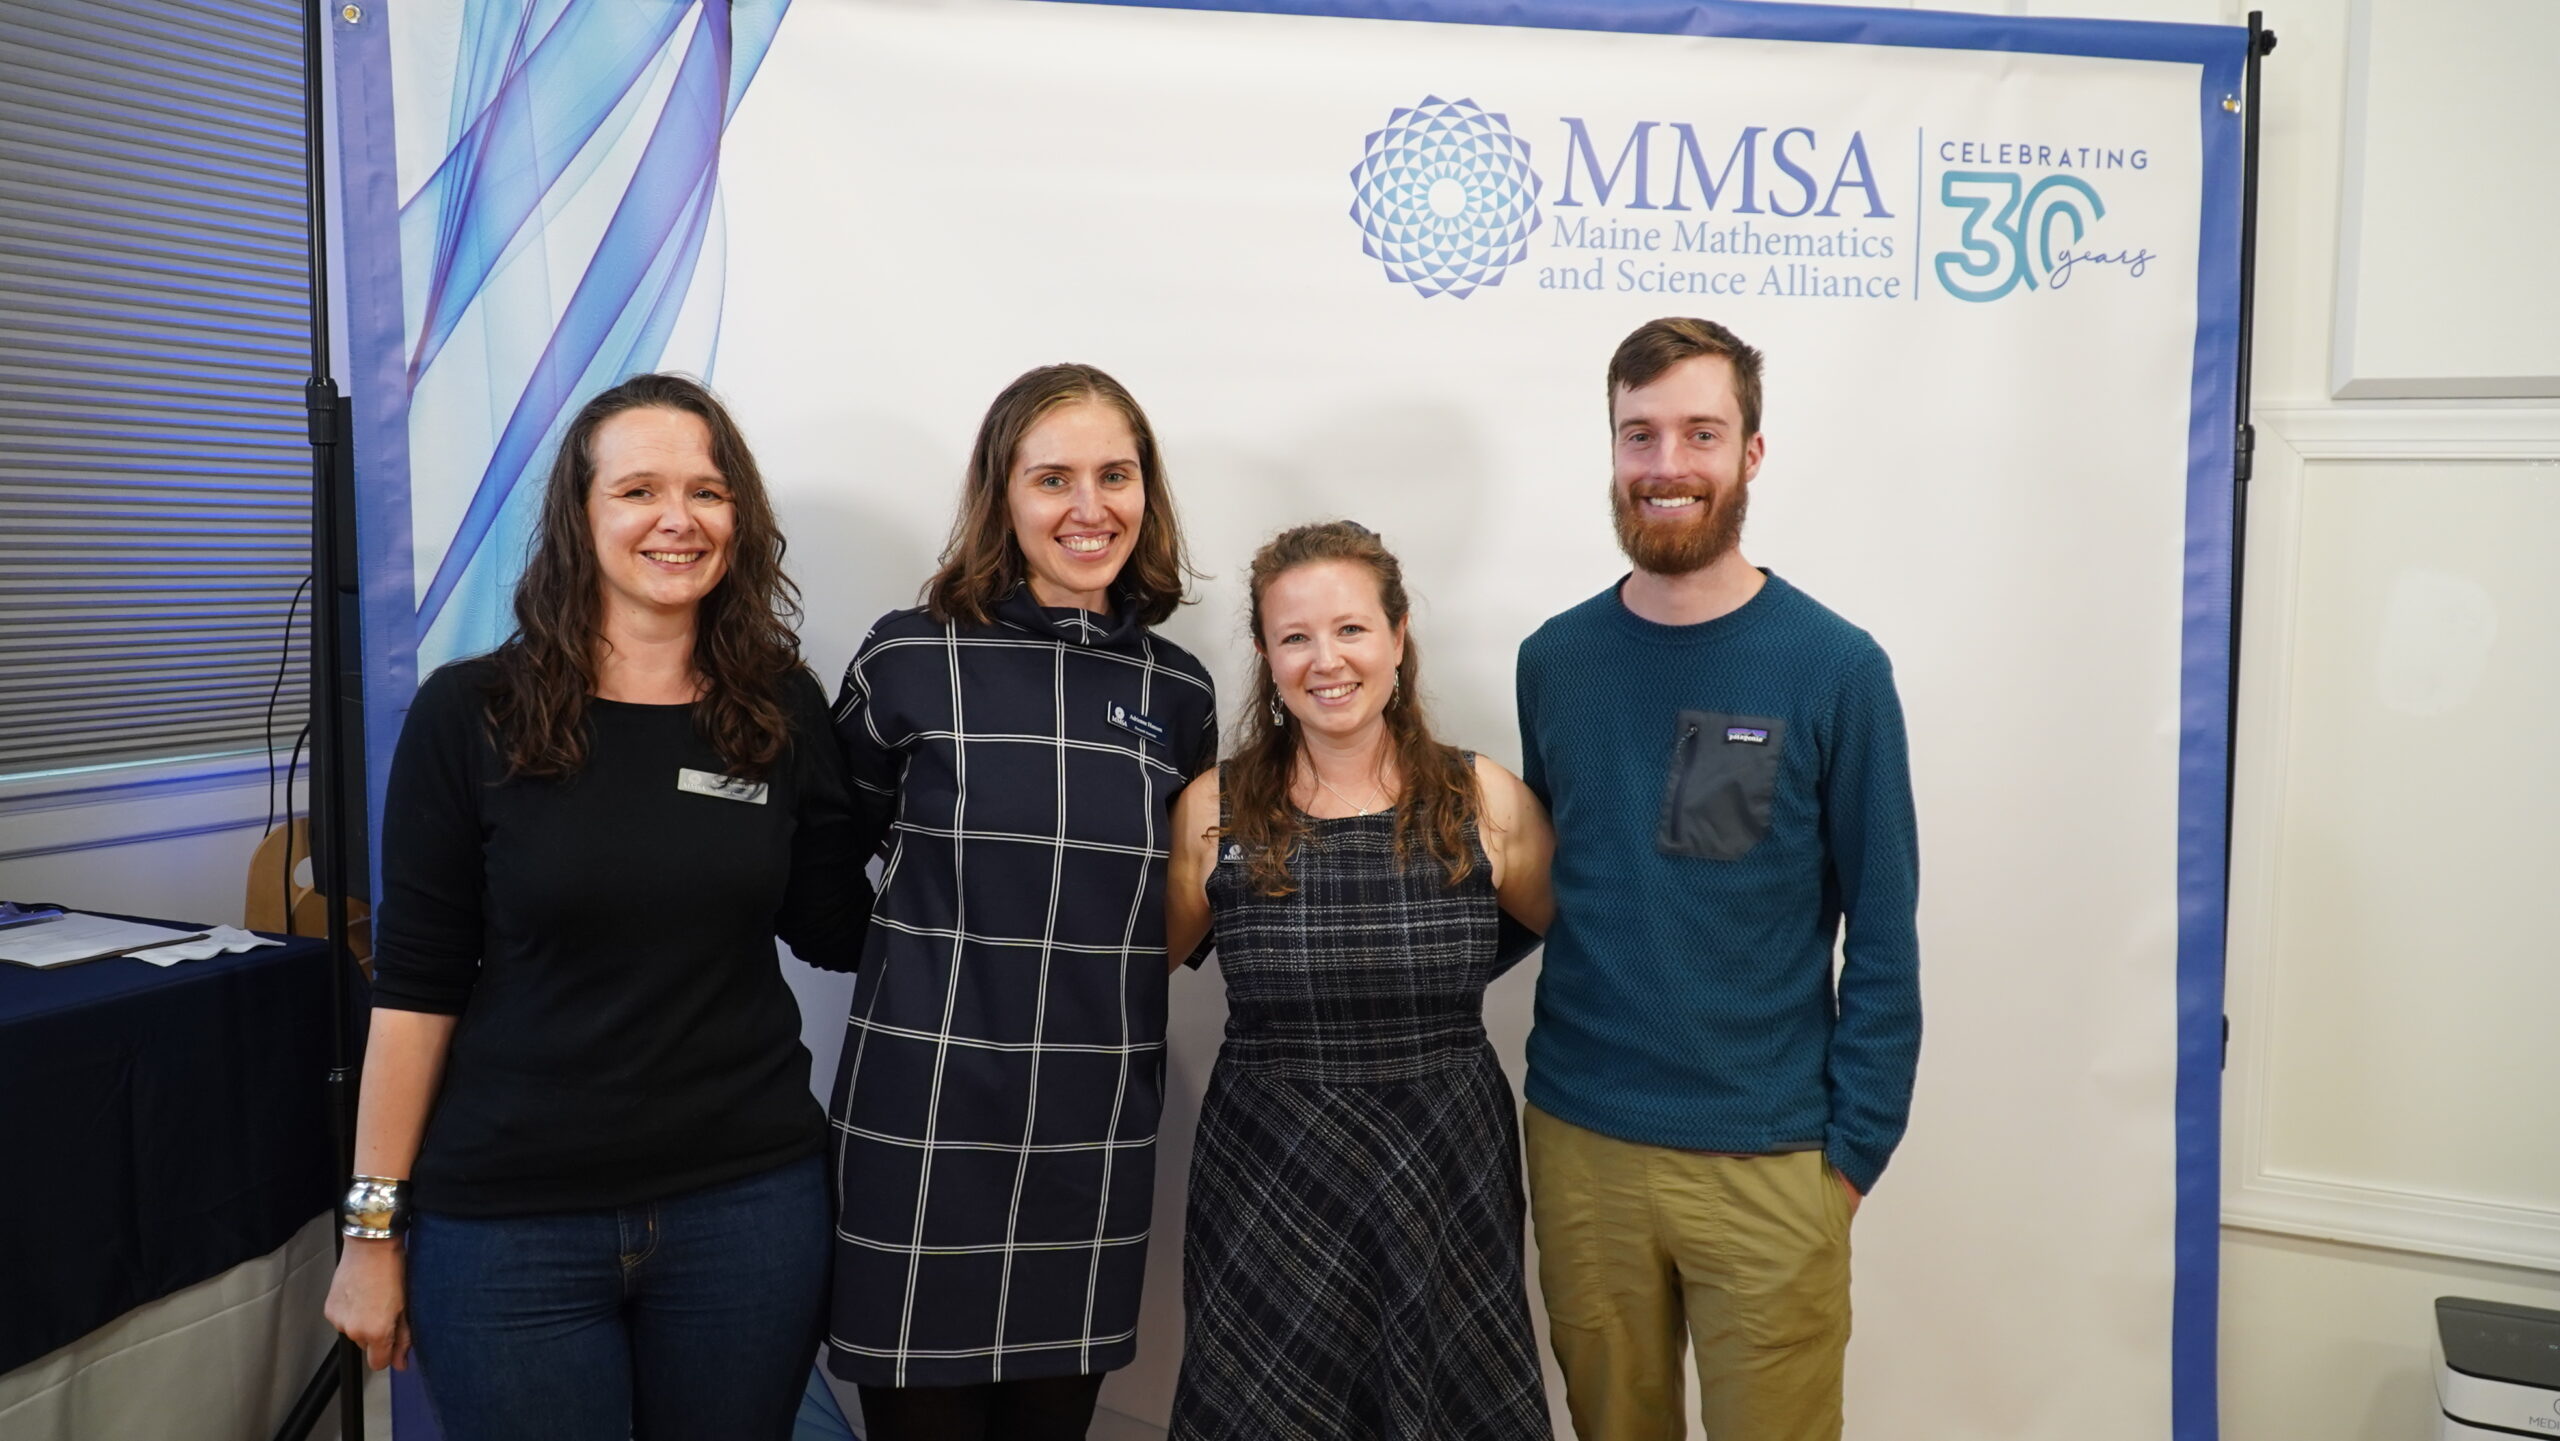 Four MMSA staff members pose in front of a photo banner.